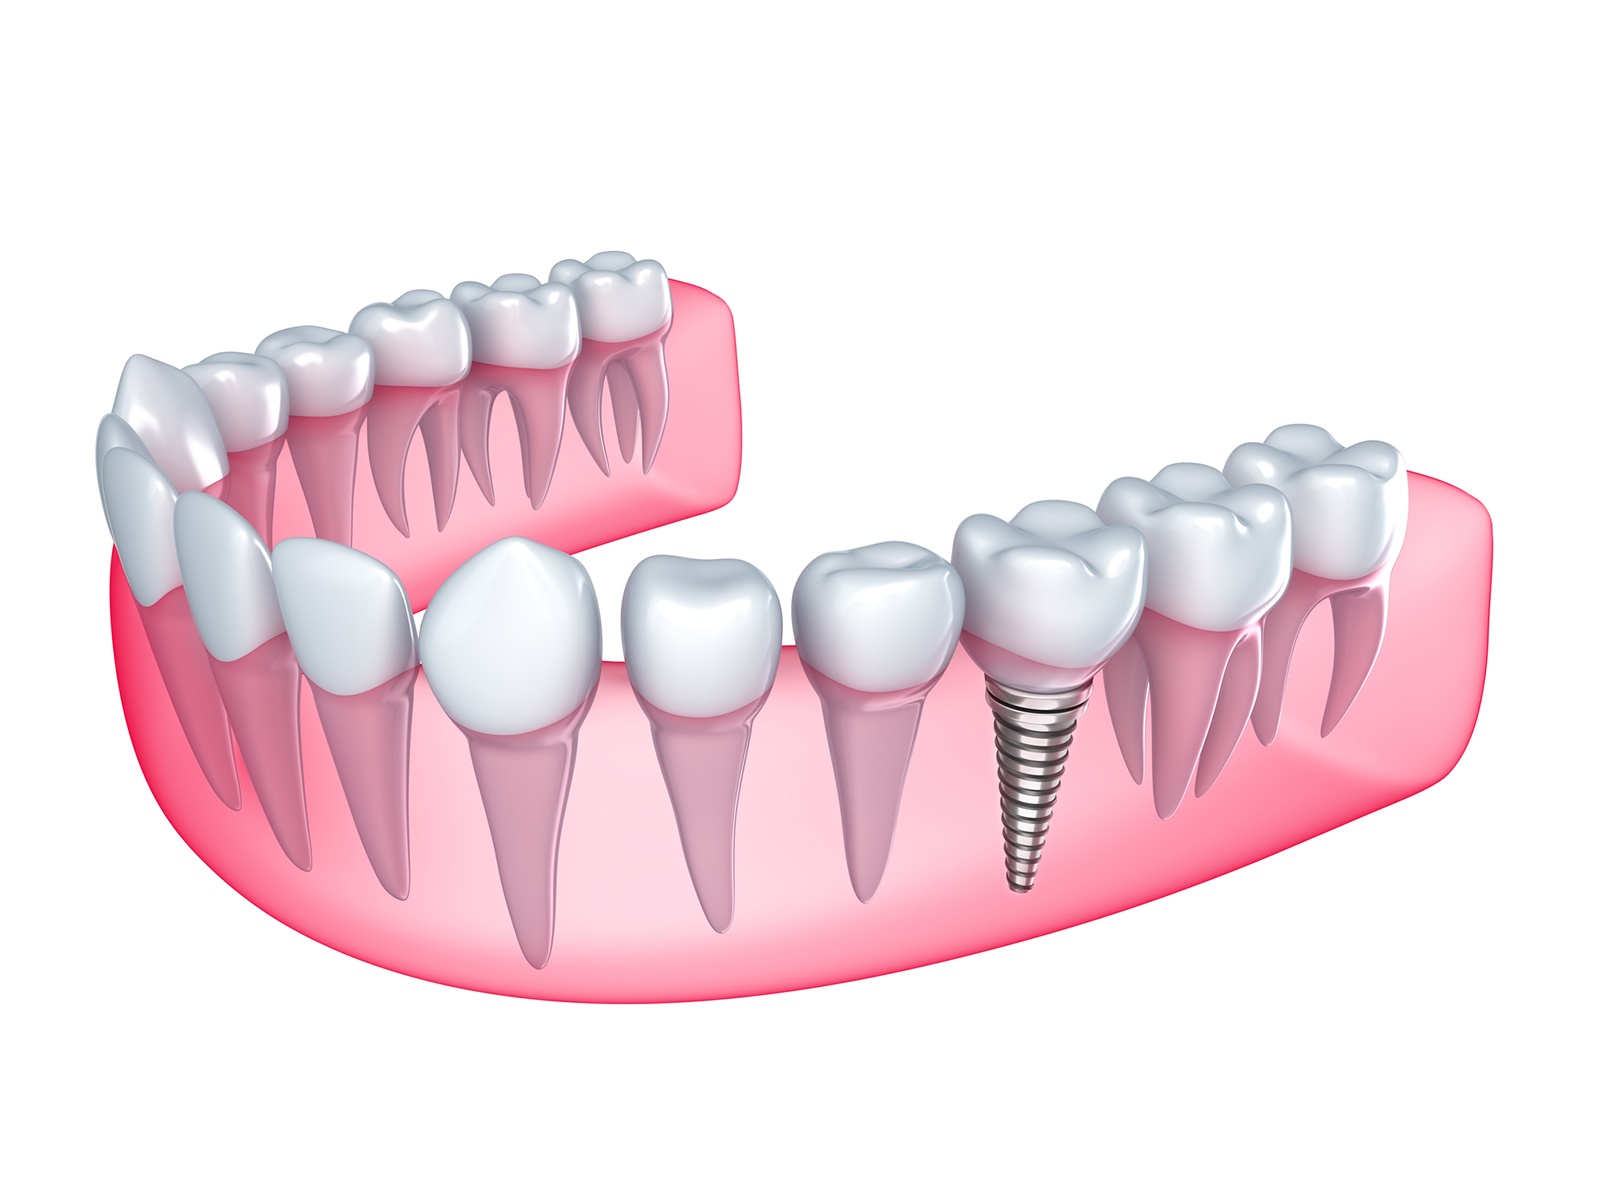 How long after dental implants can I eat normally?